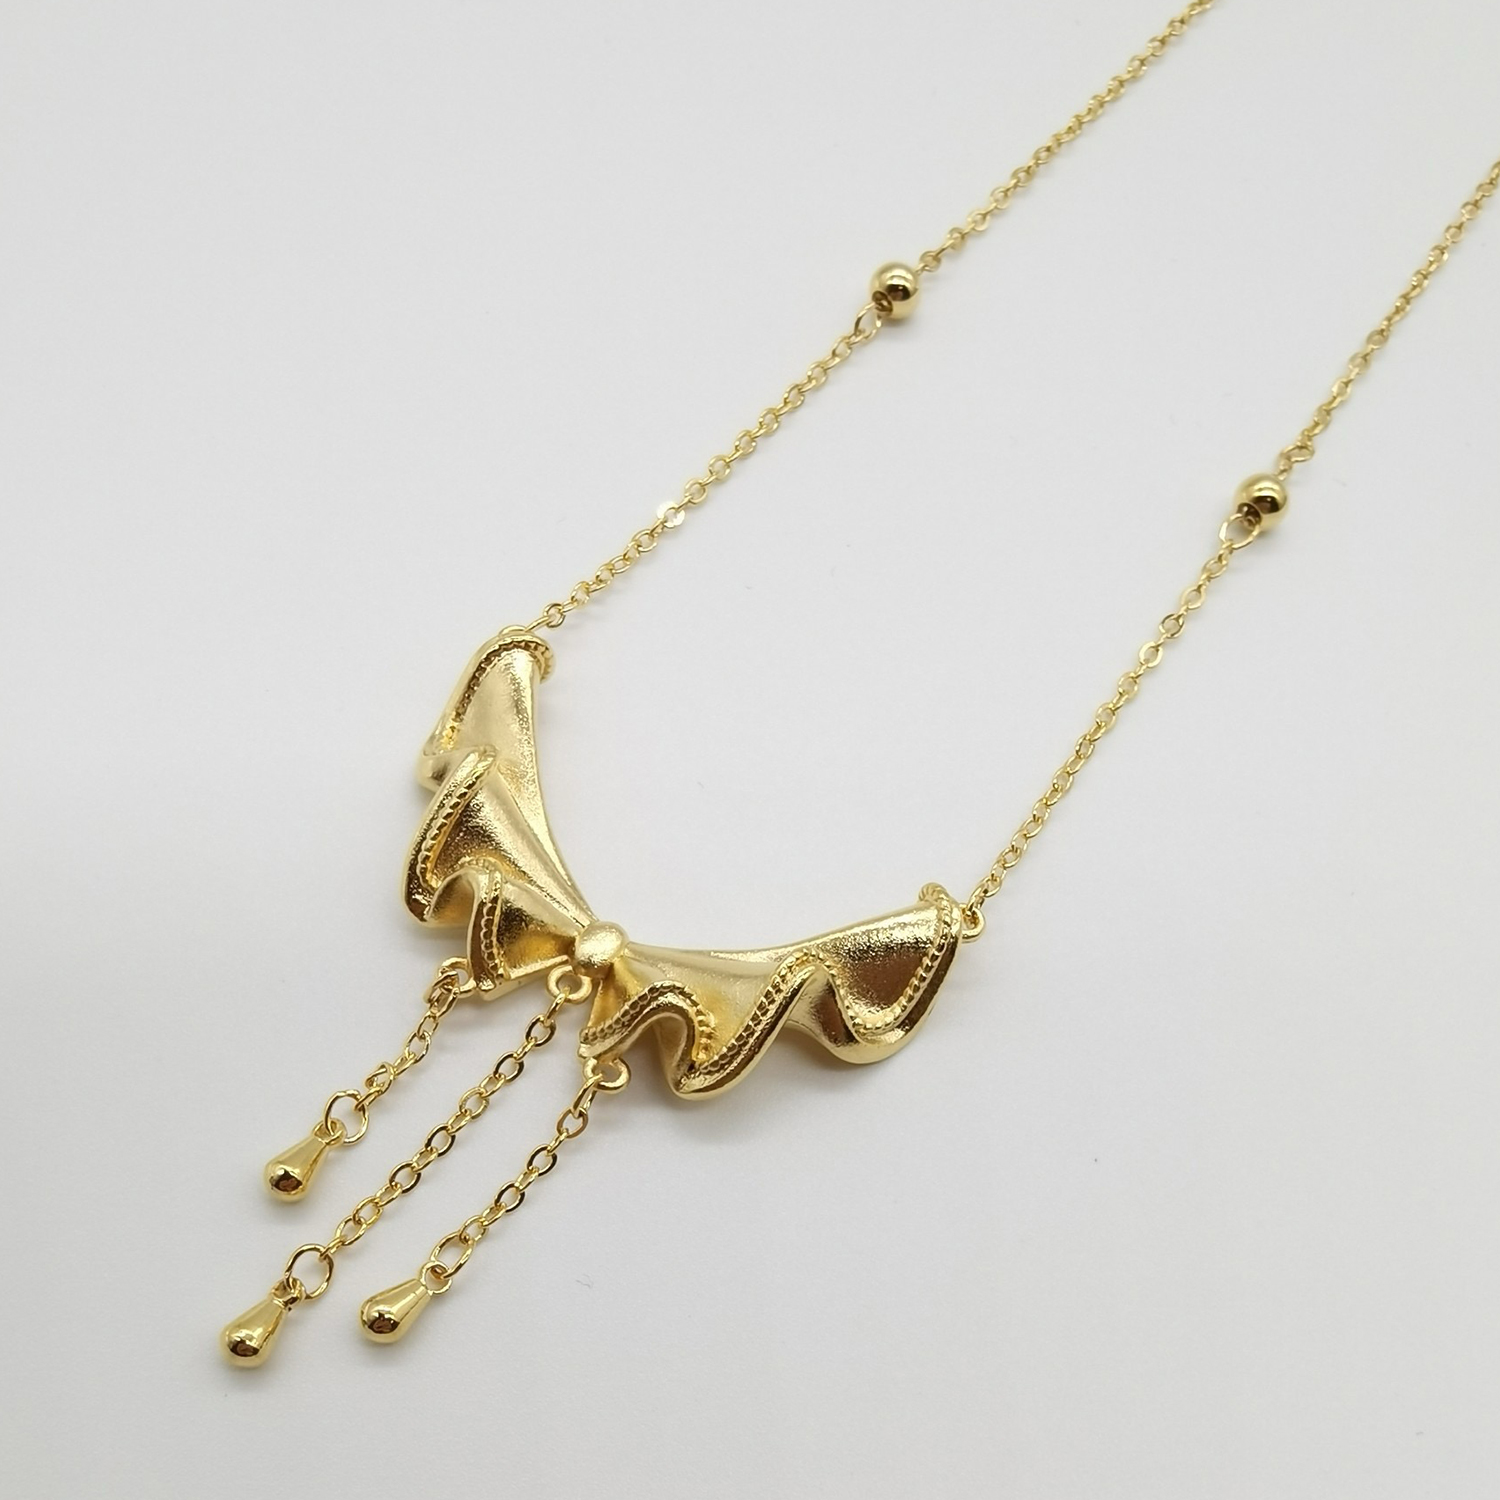 Alluvial gold vacuum electroplating 24K gold bow tassel necklace